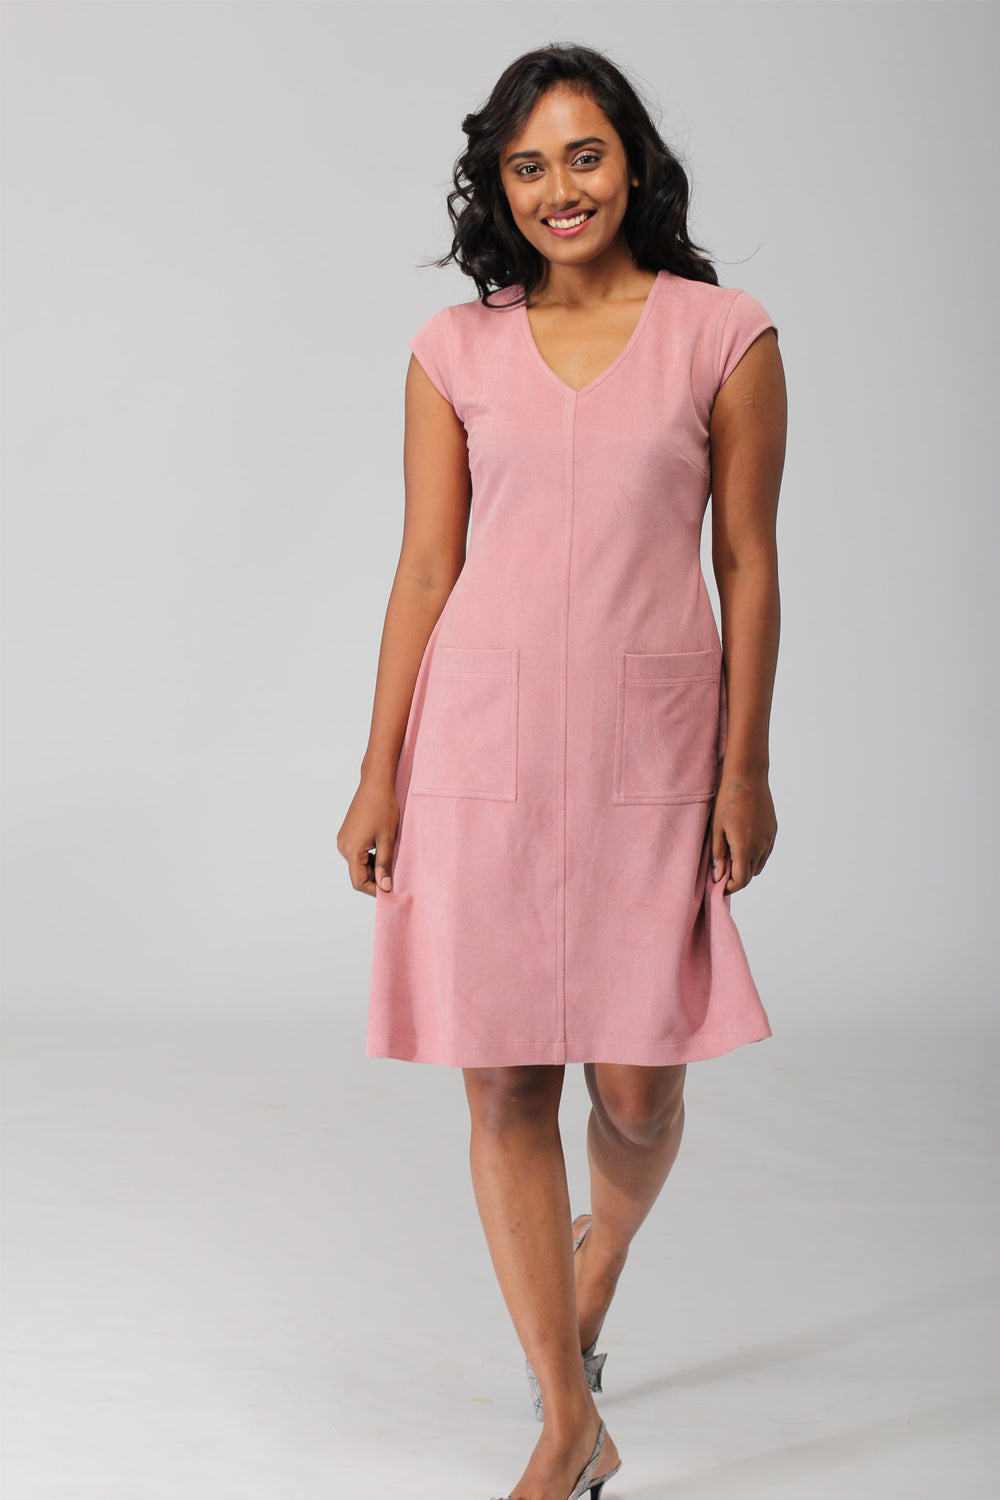 Carnation Pink A line Dress with patch pockets